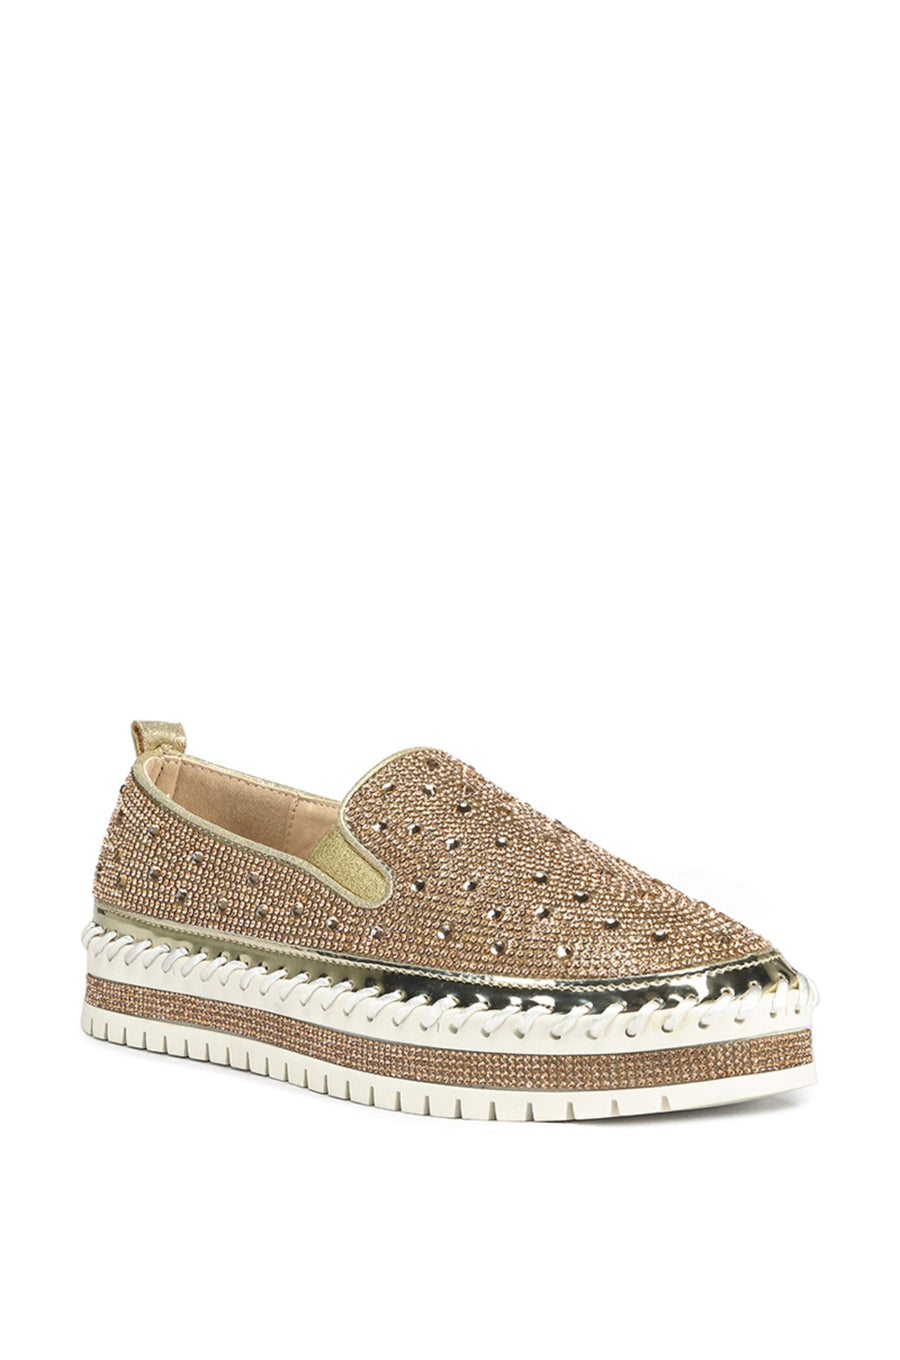 angled view of slip on metallic rose gold flat sneakers with crystal rhinestone embellishments and a white braided platform sole